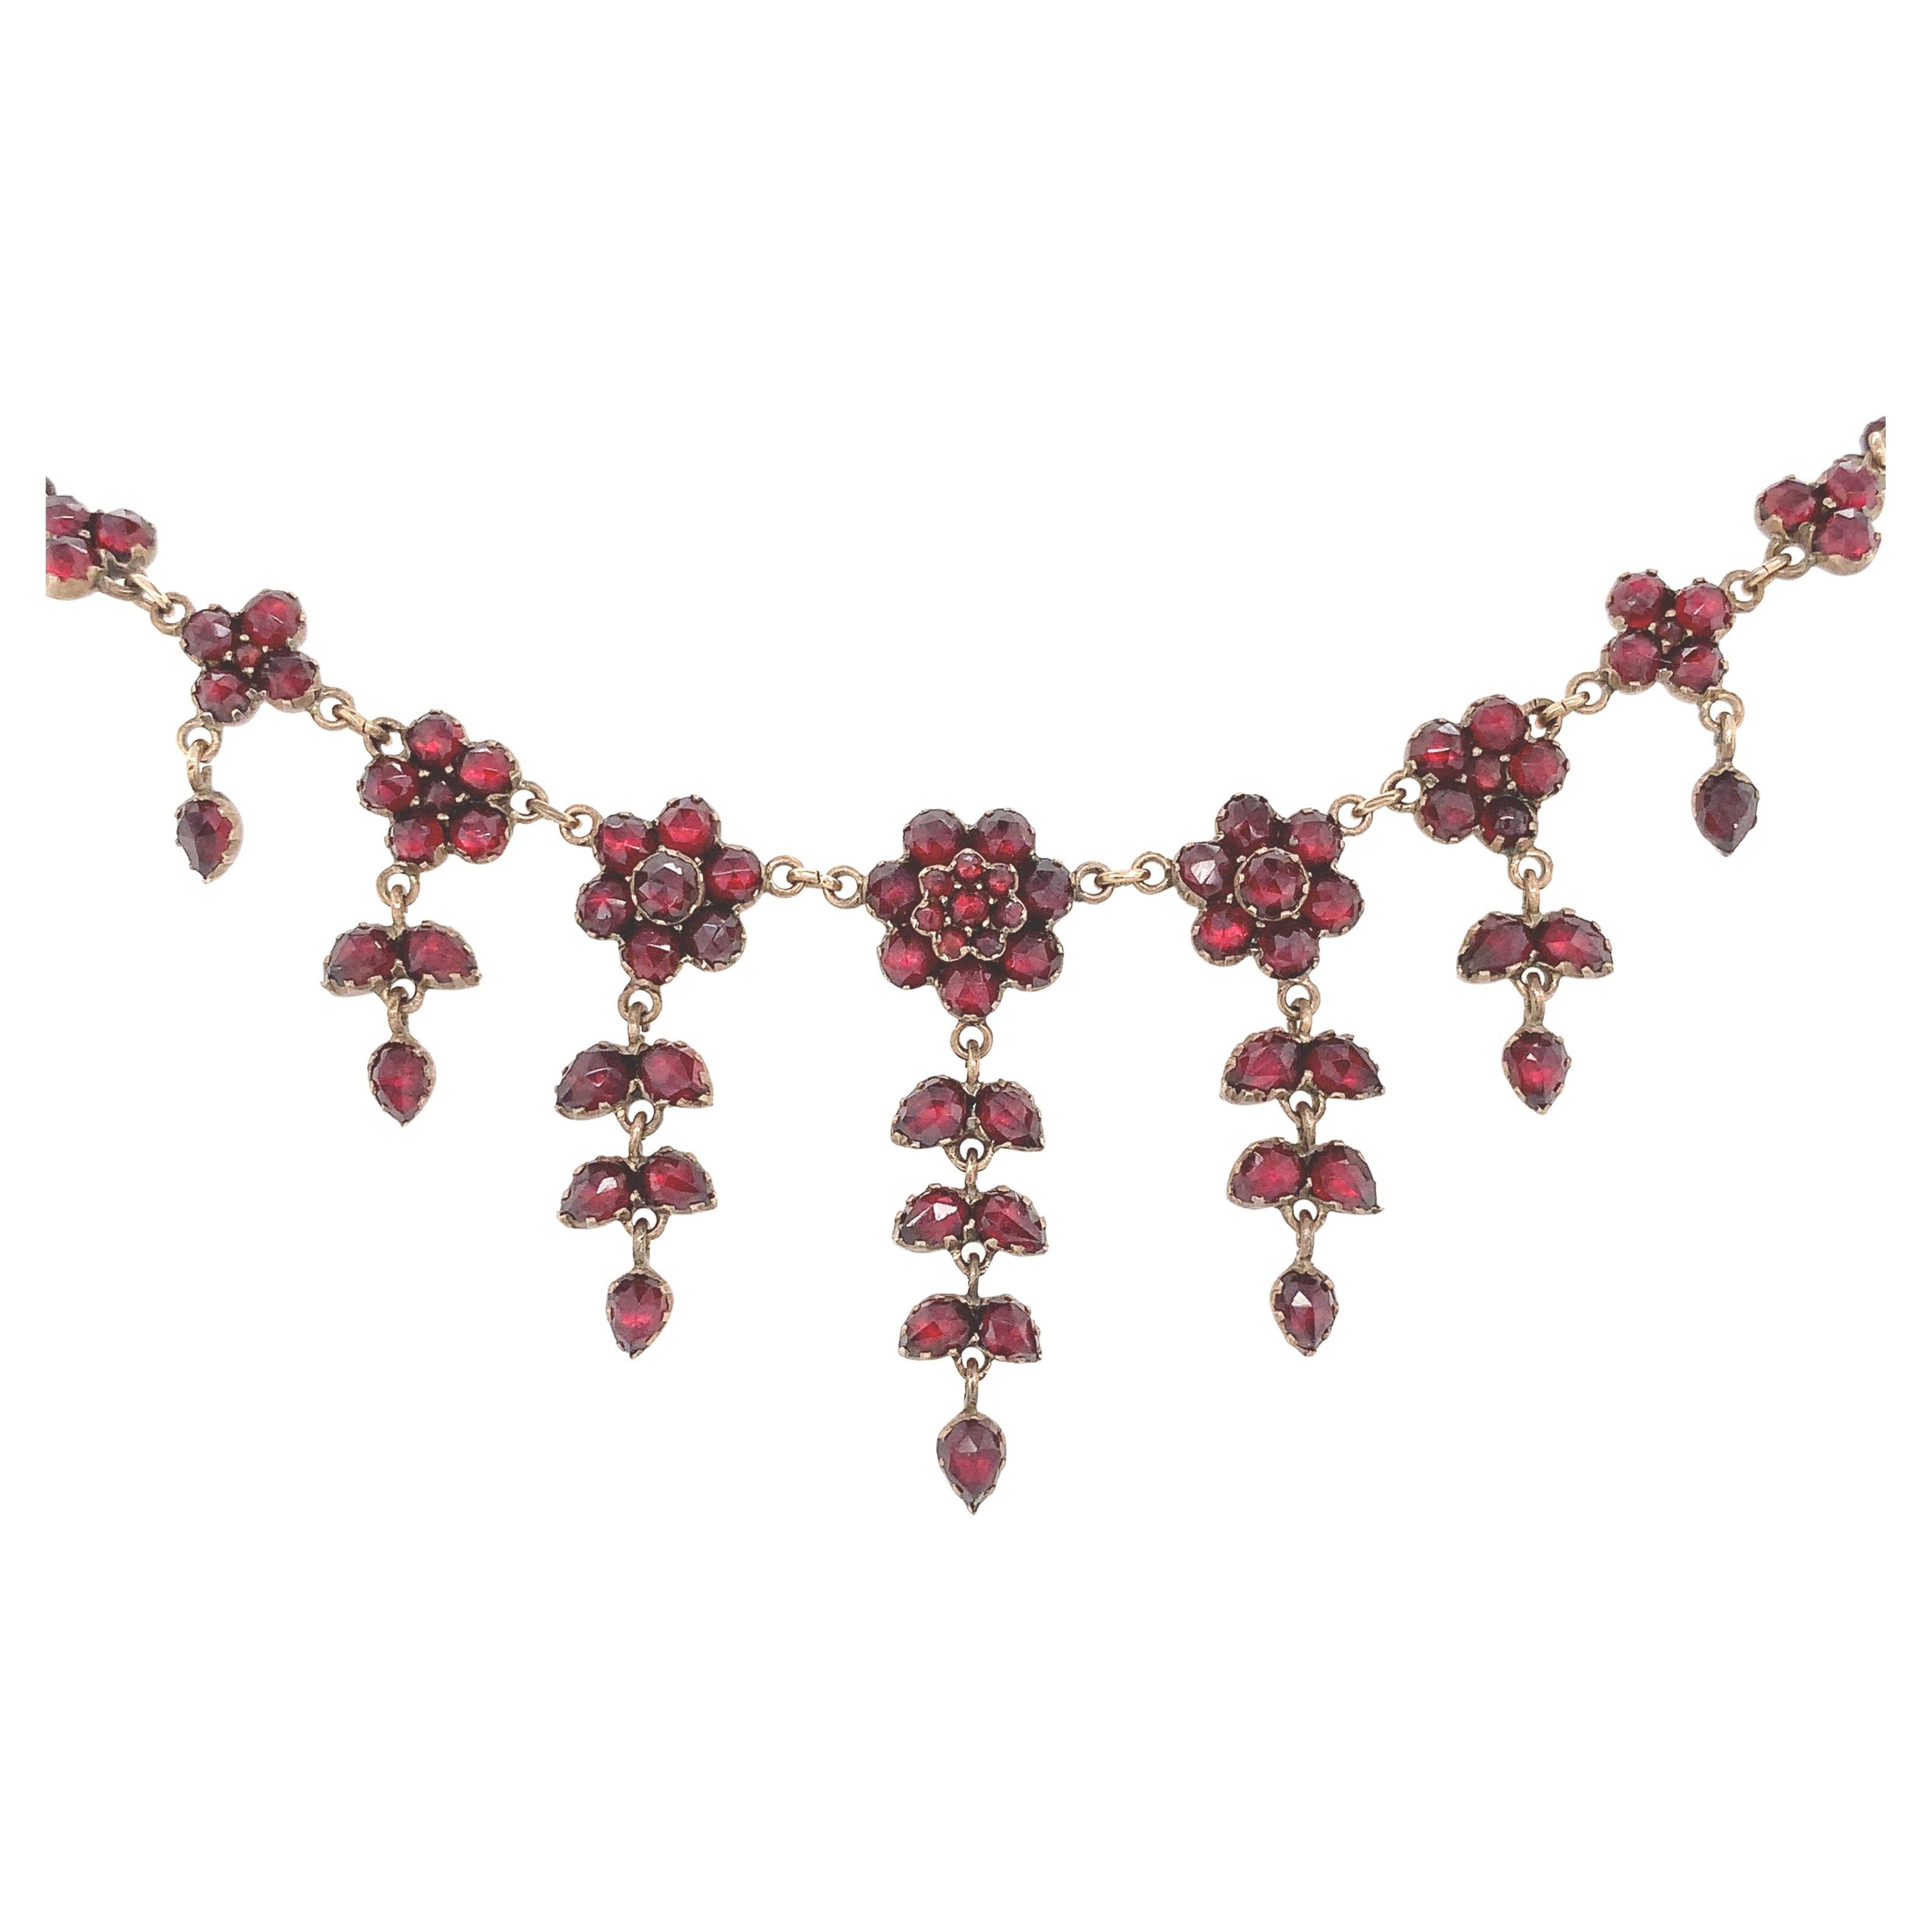 Bohemian Garnet Necklace with 7 drops  For Sale